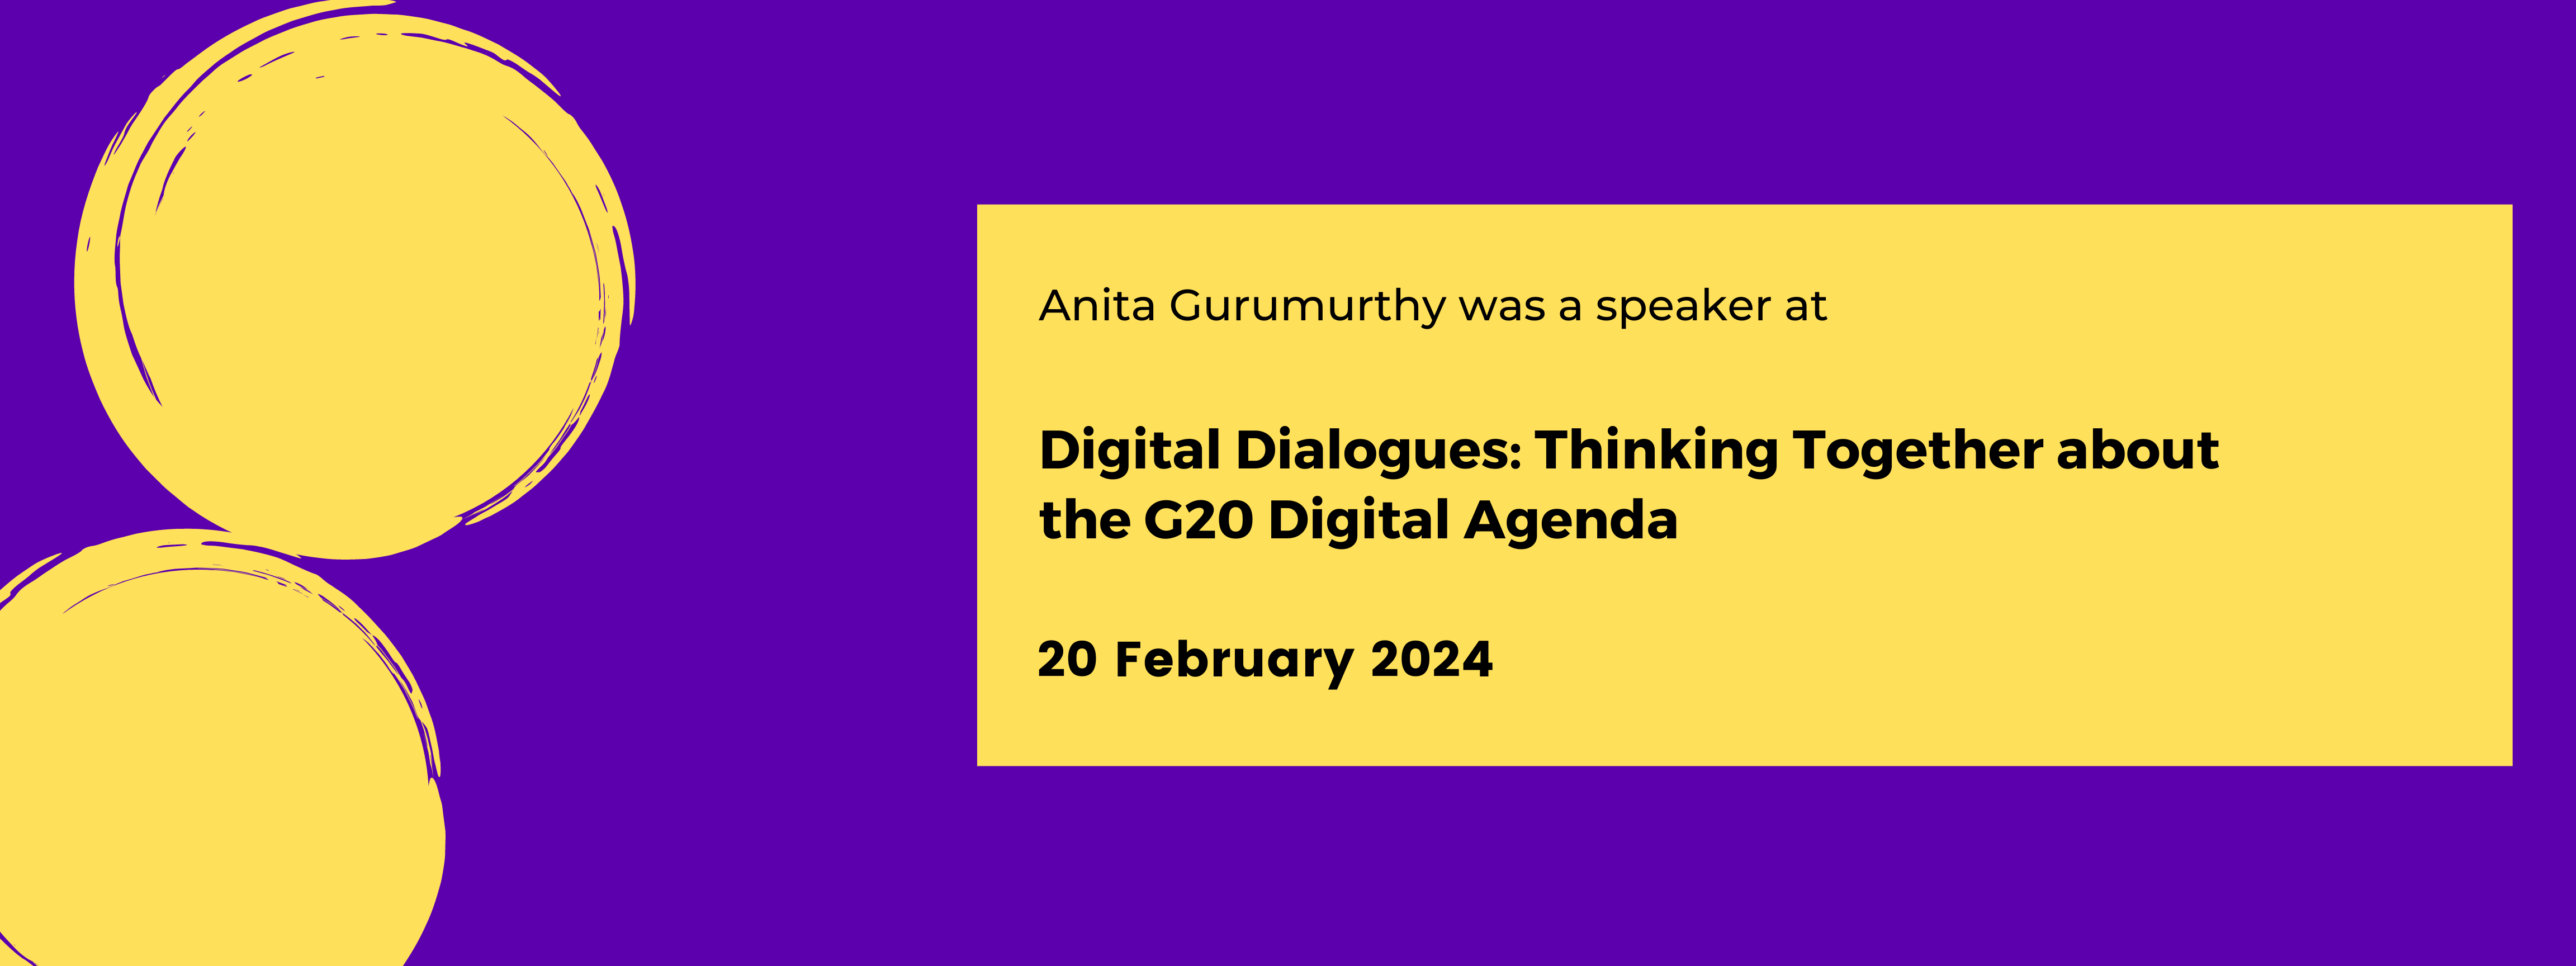 Digital Dialogues: Thinking Together about the G20 Digital Agenda